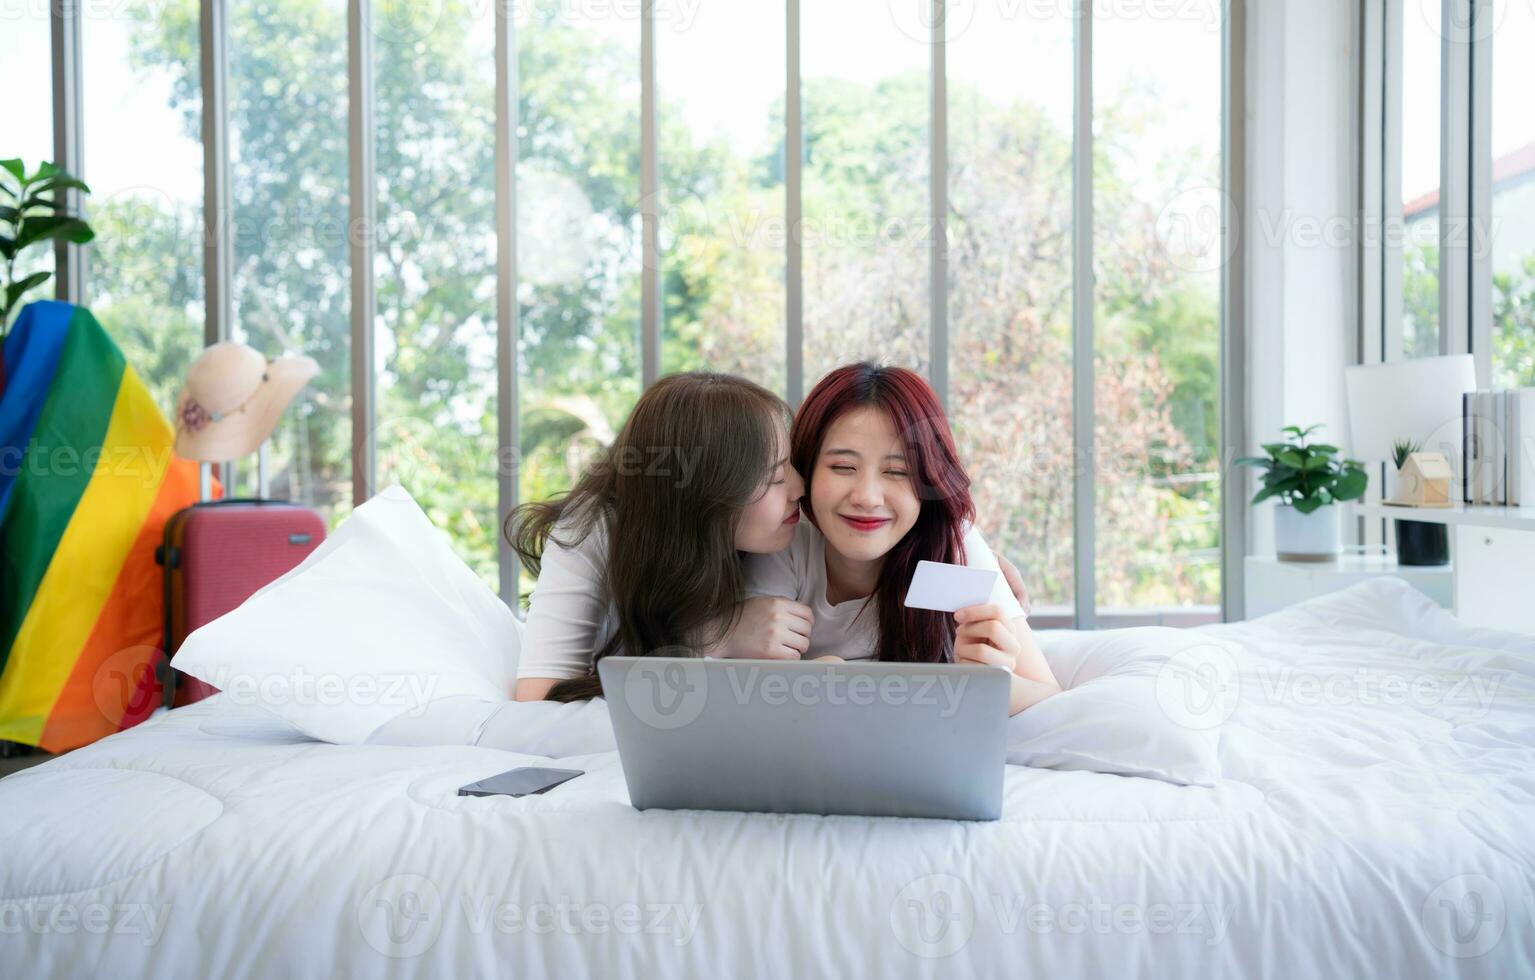 The LGBT couples are comfortable with credit card payments when shopping online. photo